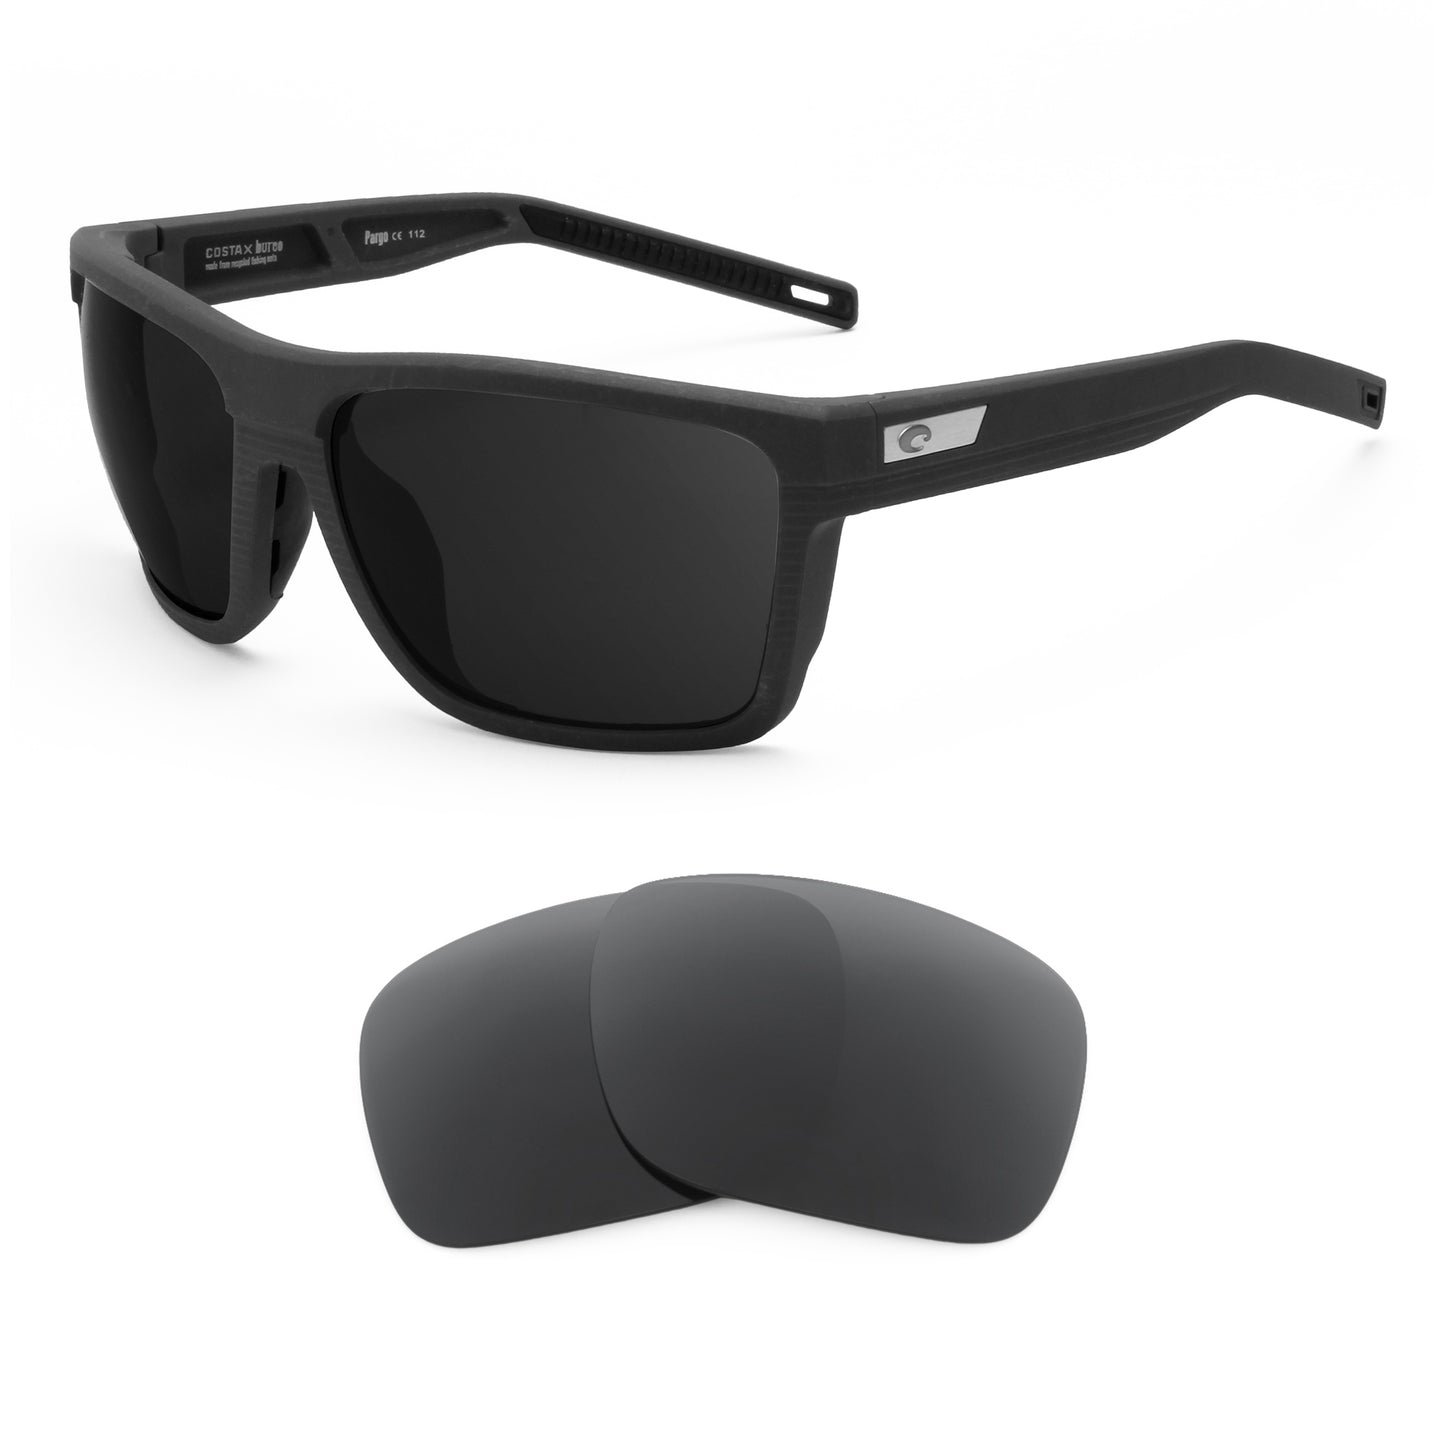 Costa Pargo sunglasses with replacement lenses